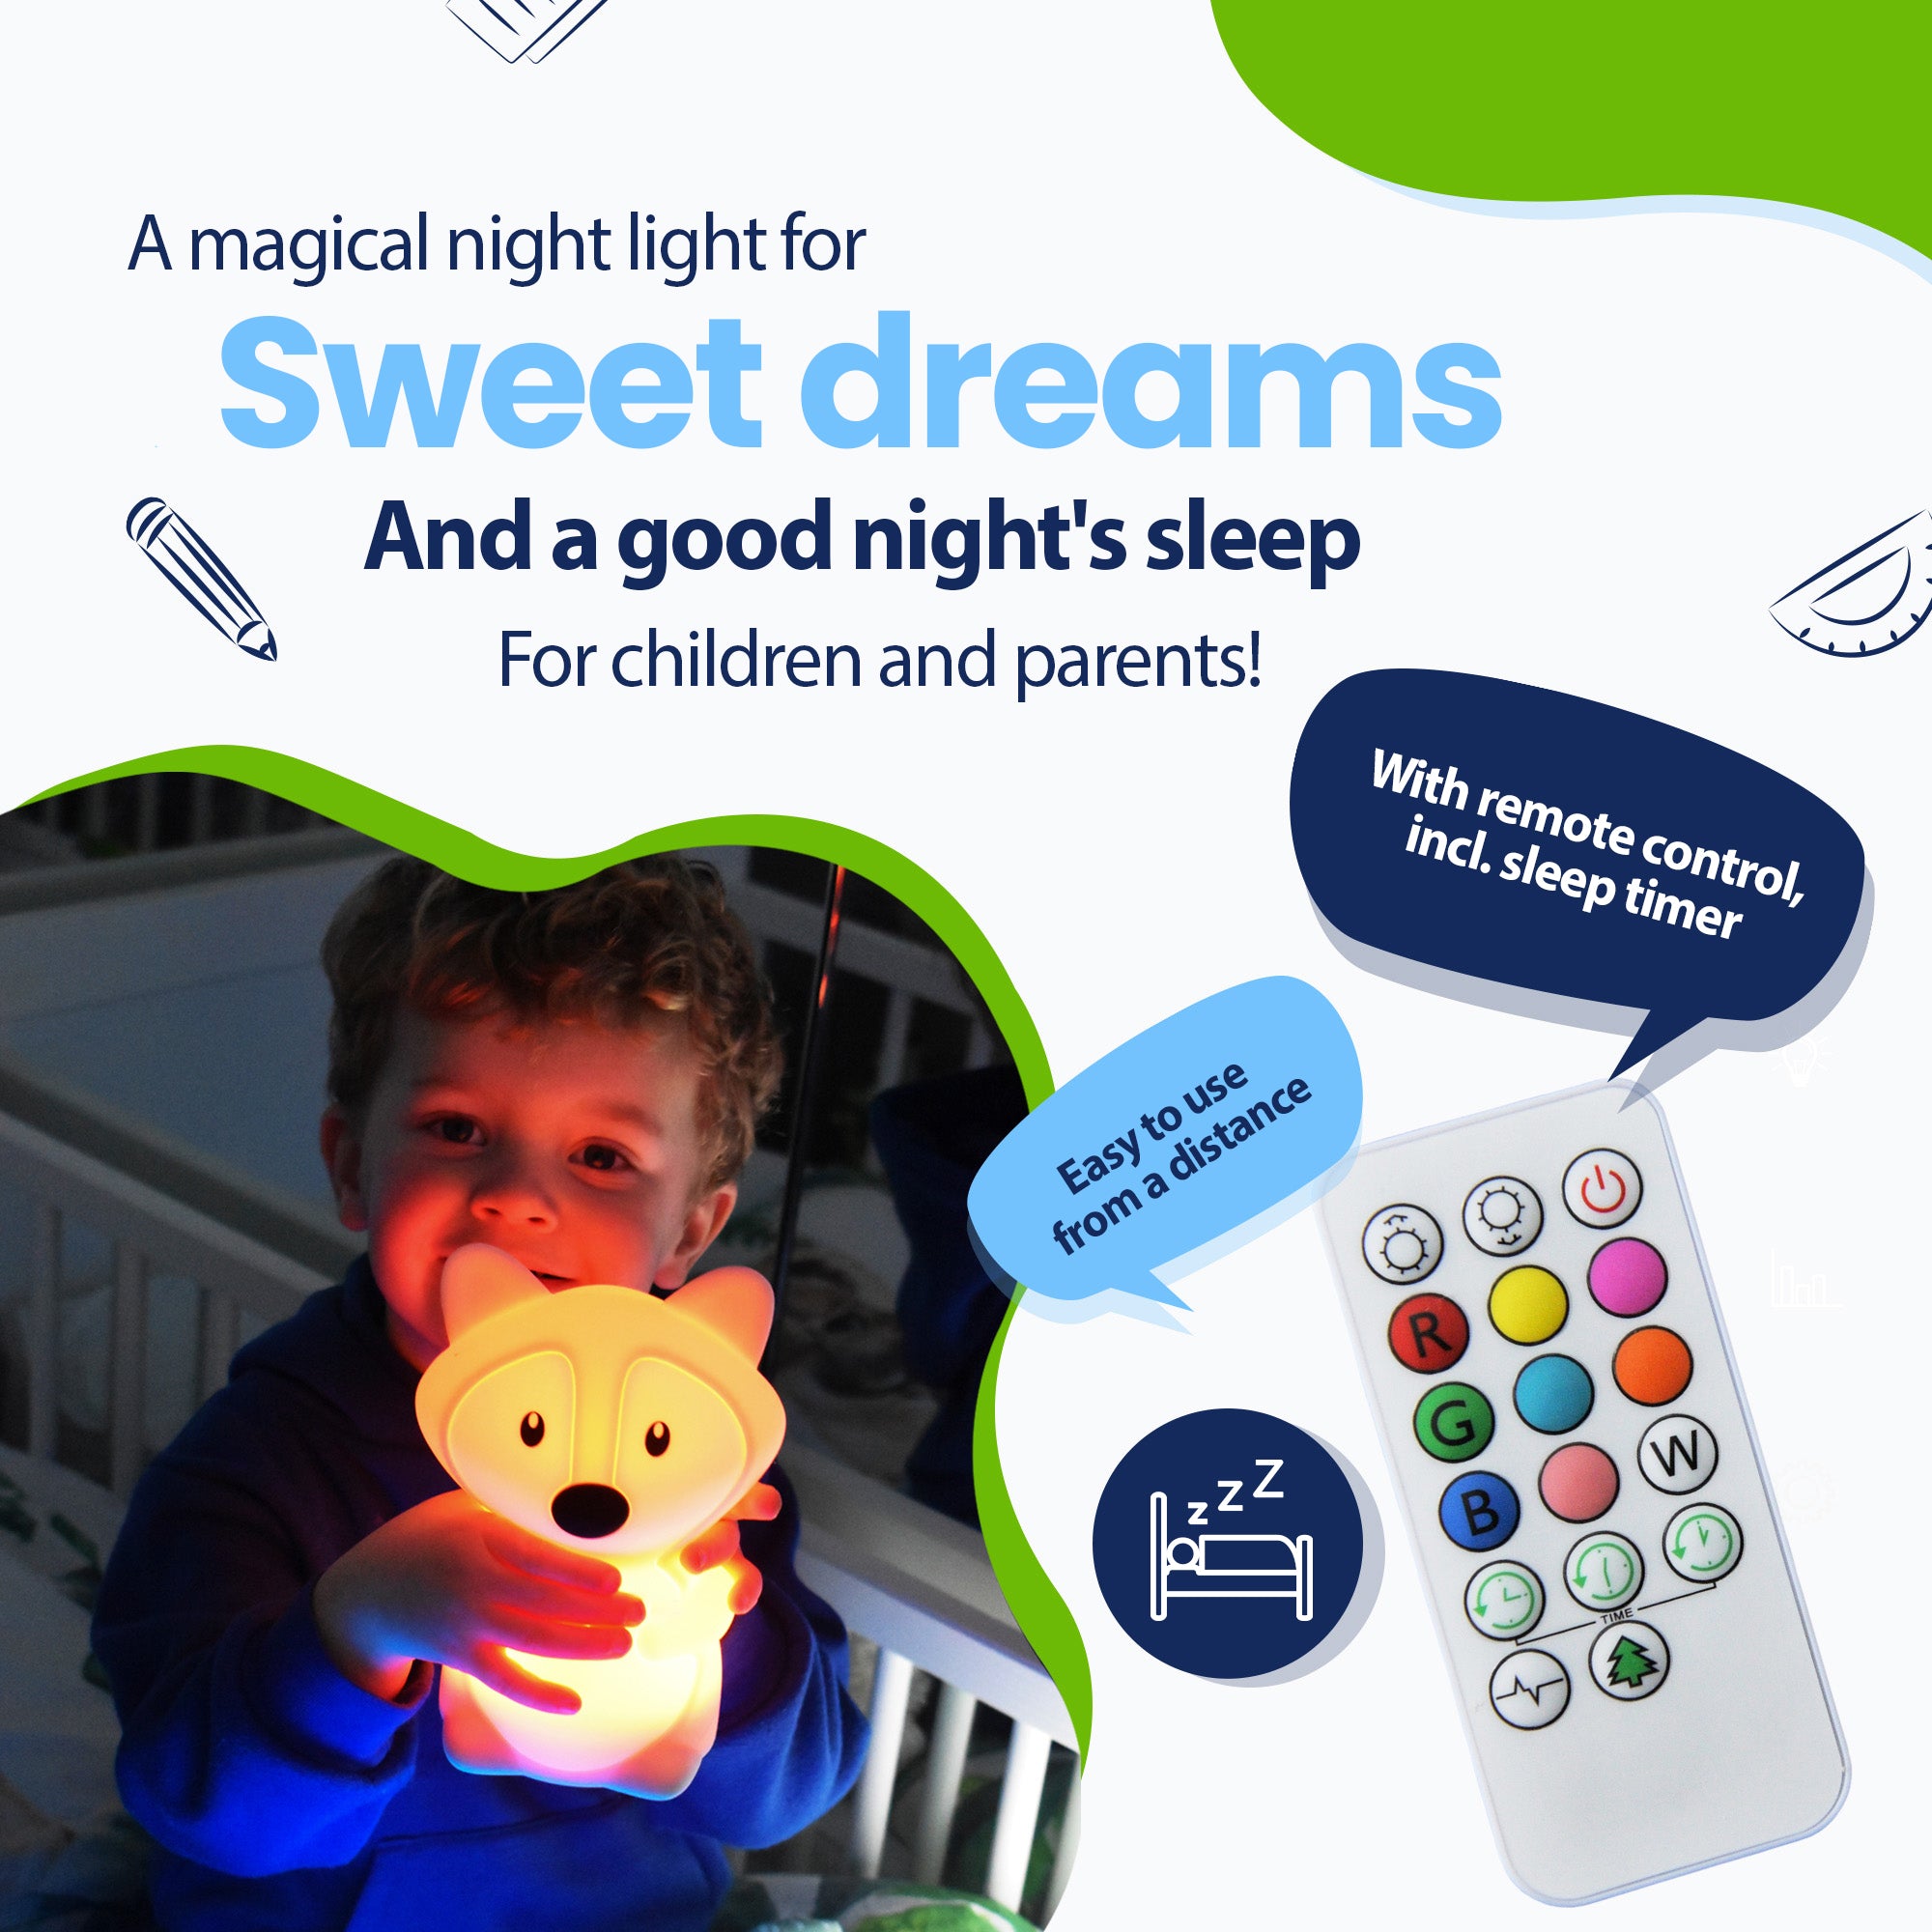 A magical night light for sweet dreams and a healthy night's sleep for children and parents - with remote control including sleep timer - easily from a distance